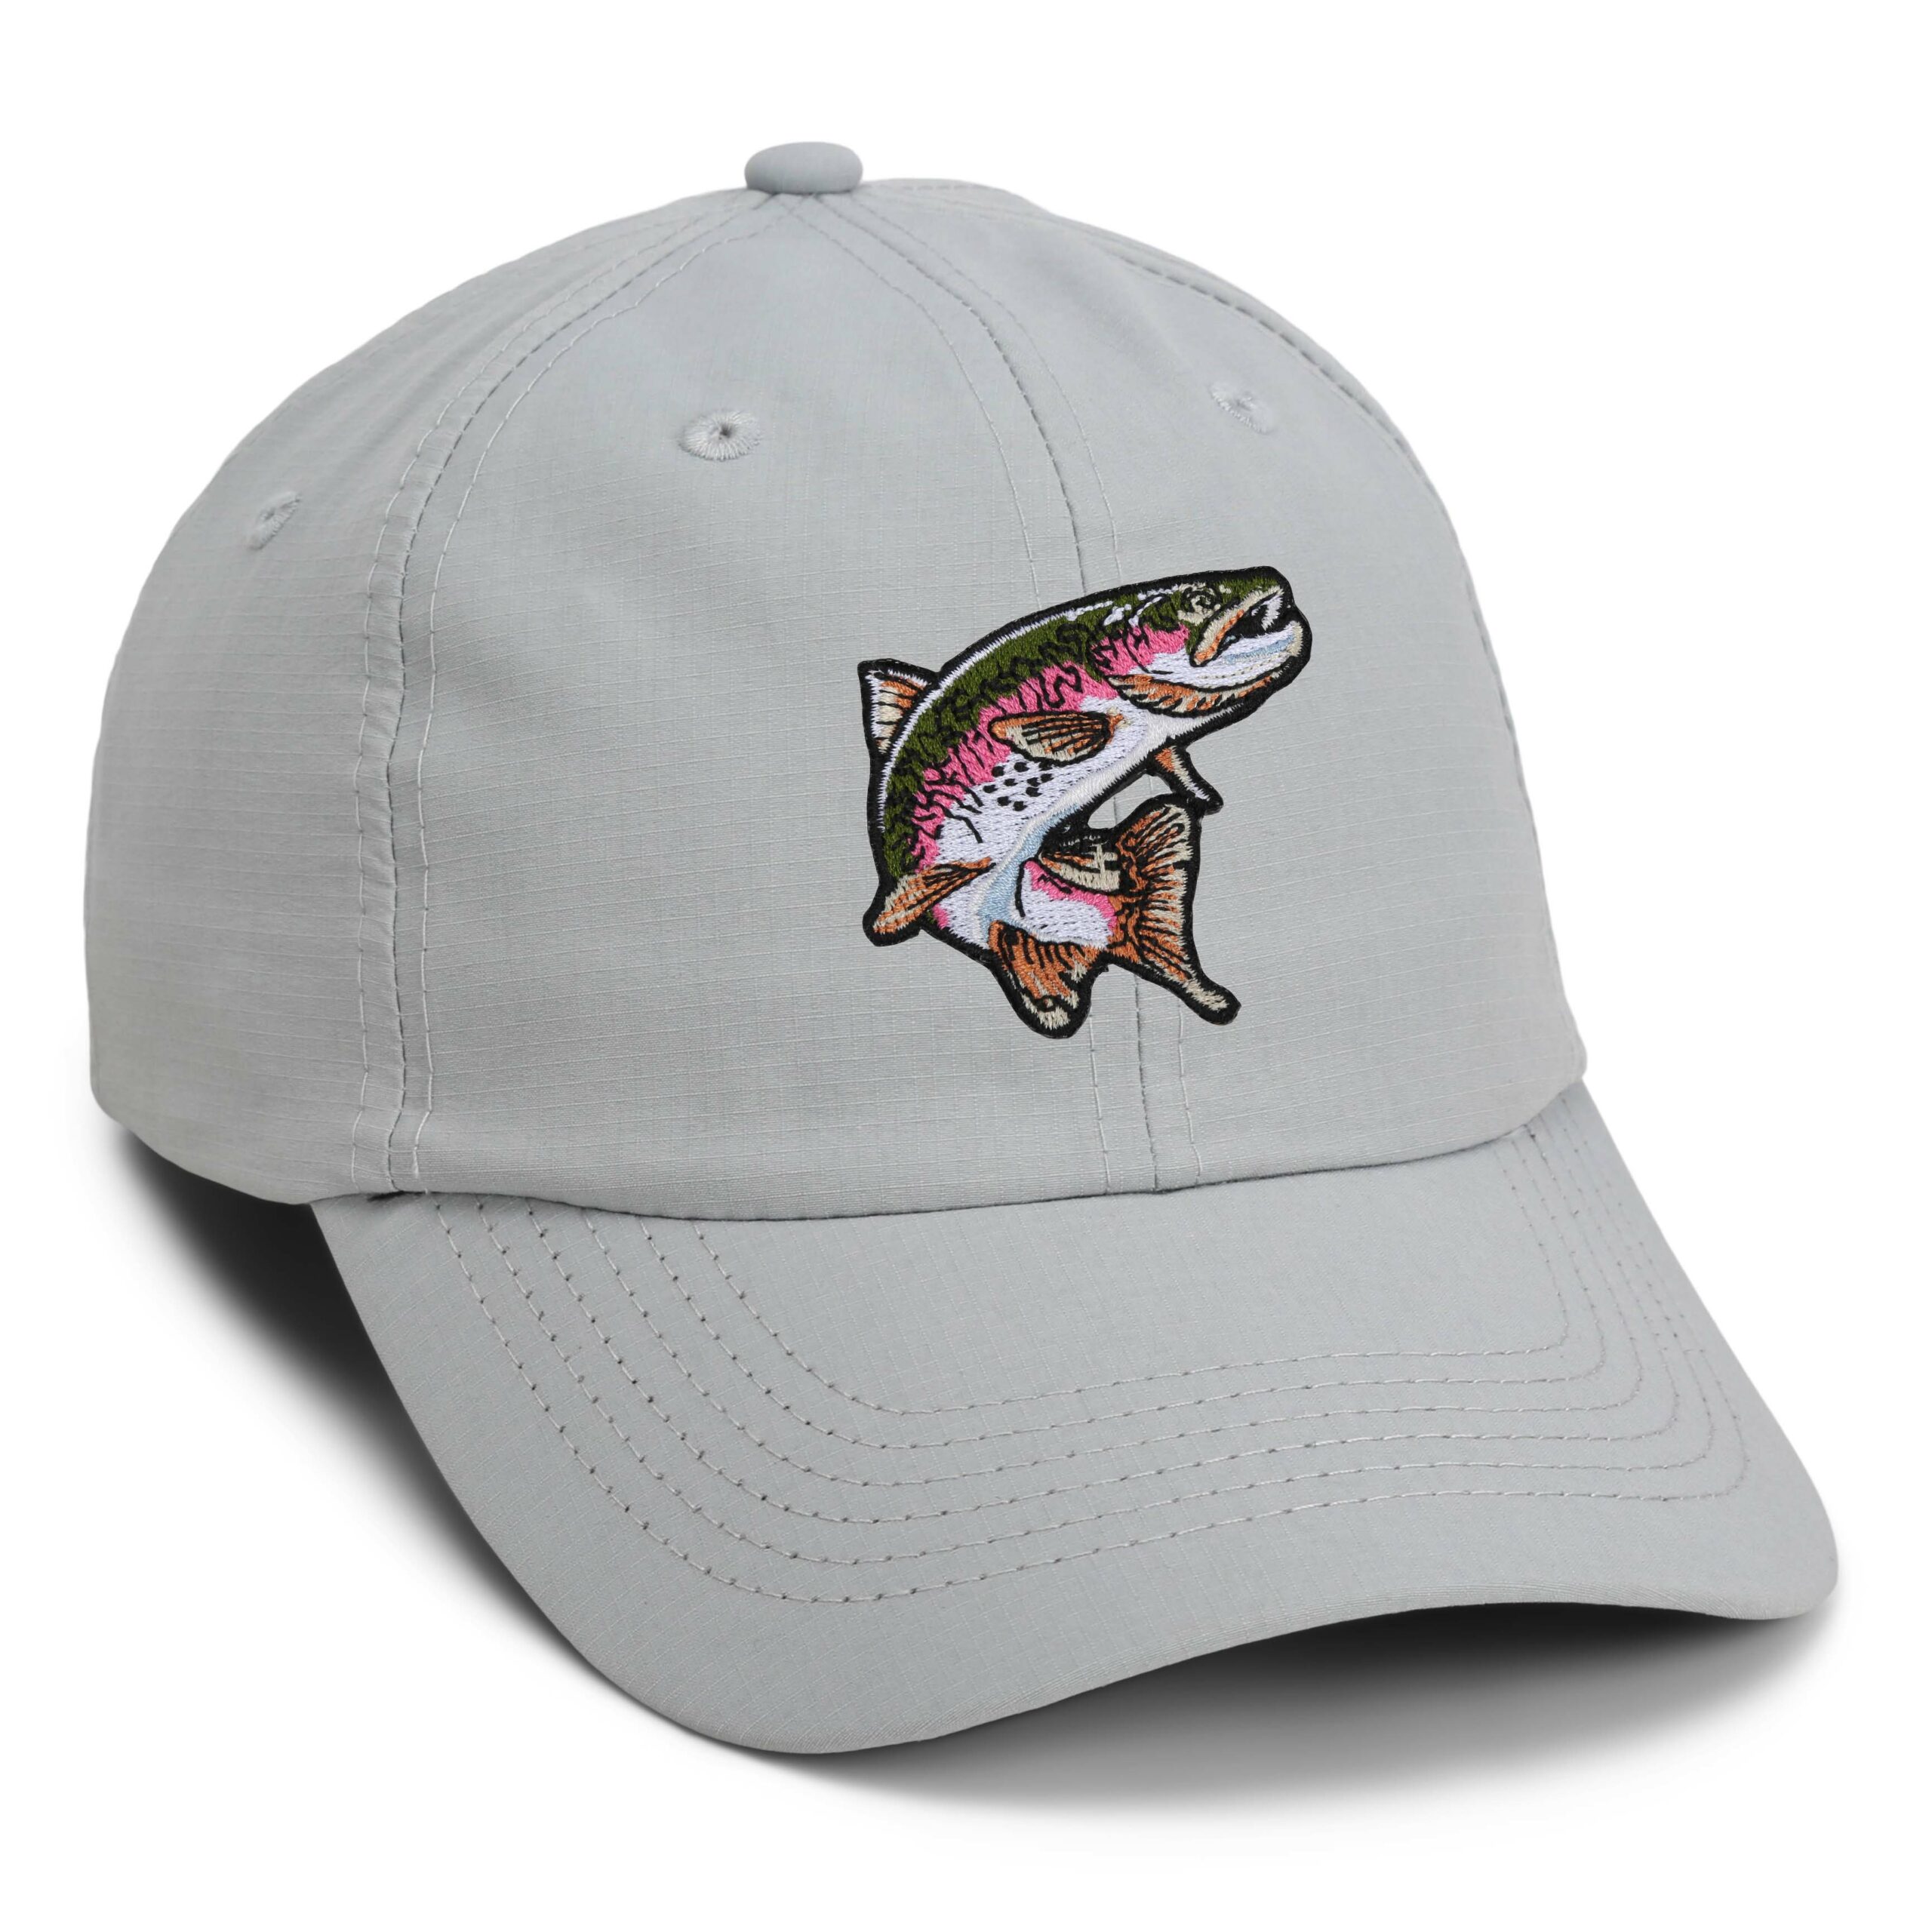 Classic fishing style hat with lures on  Fishing hat, Fishing bucket hat,  Fishing outfits